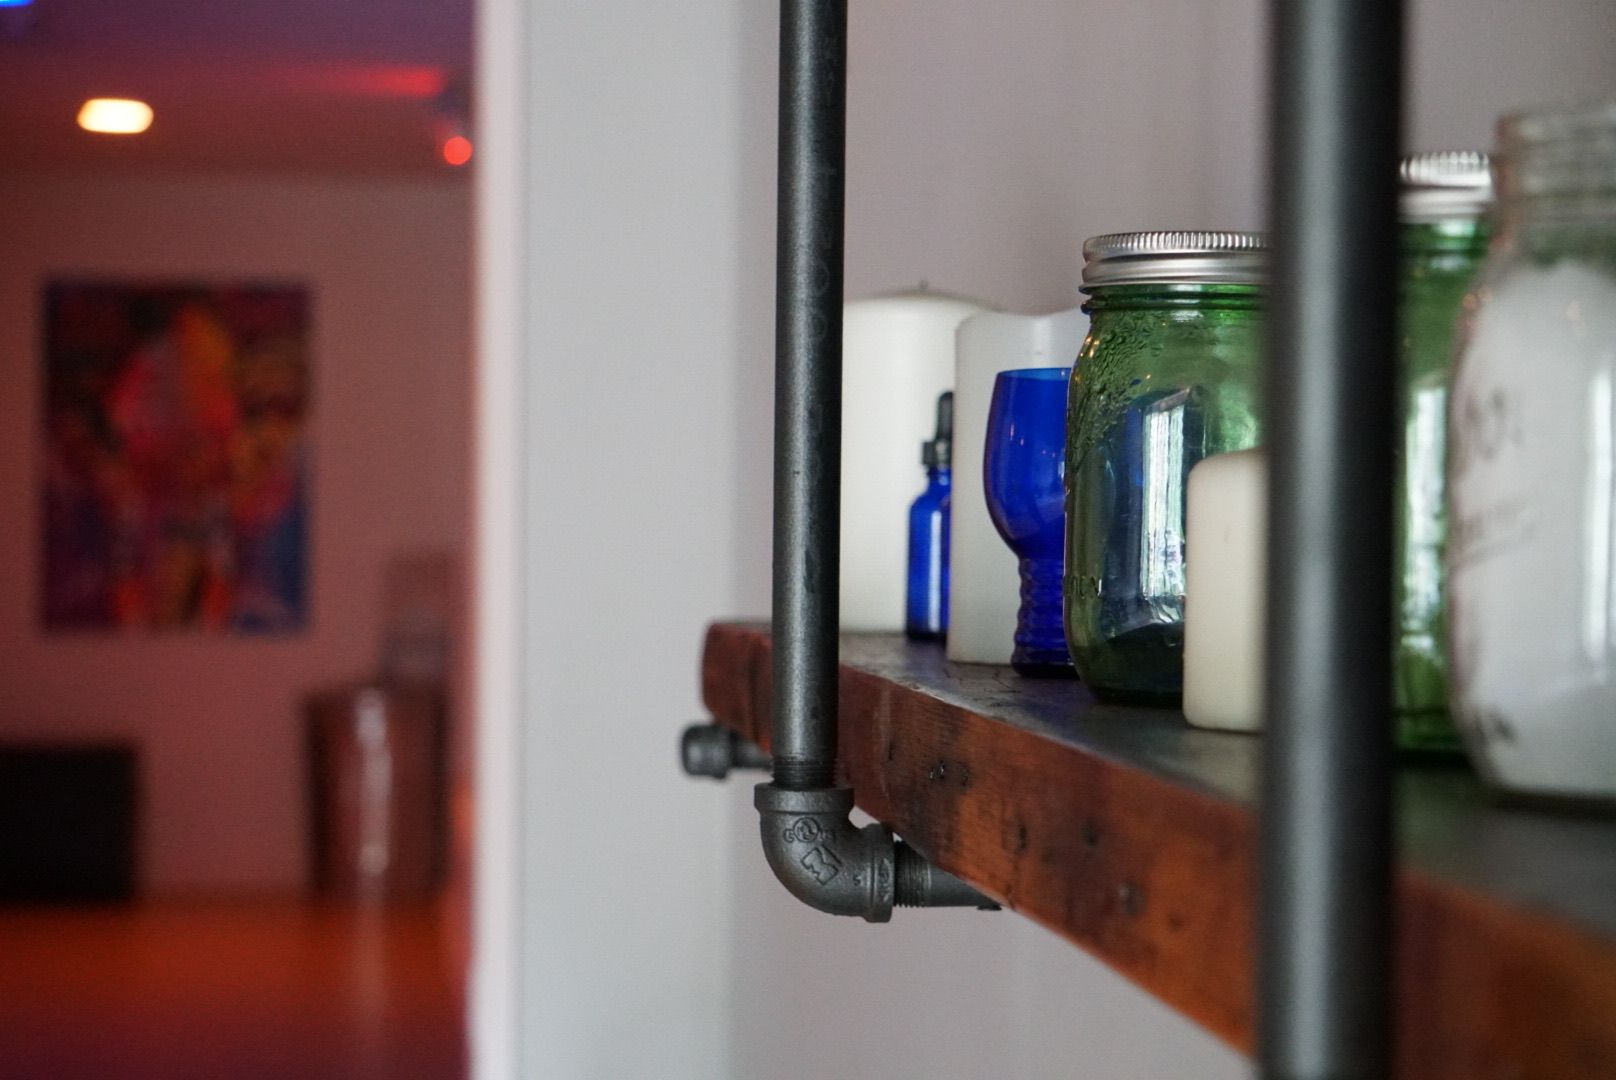 A shelf with candles and jars on it in a room.